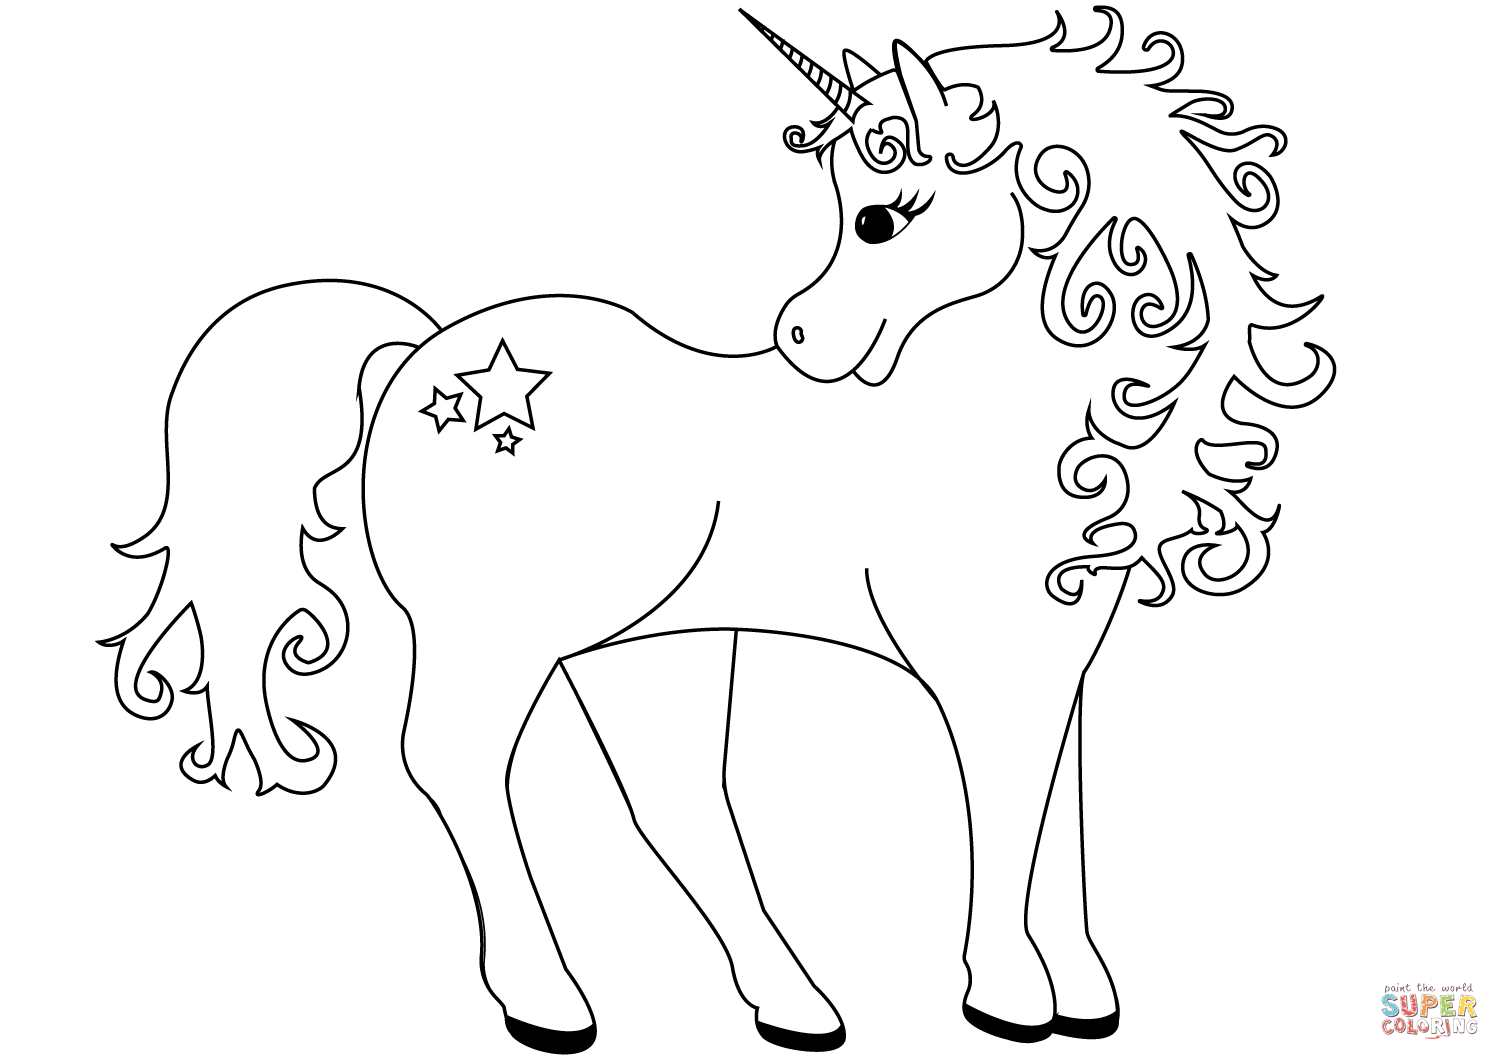 Cute Unicorn Coloring Pages at GetDrawings | Free download